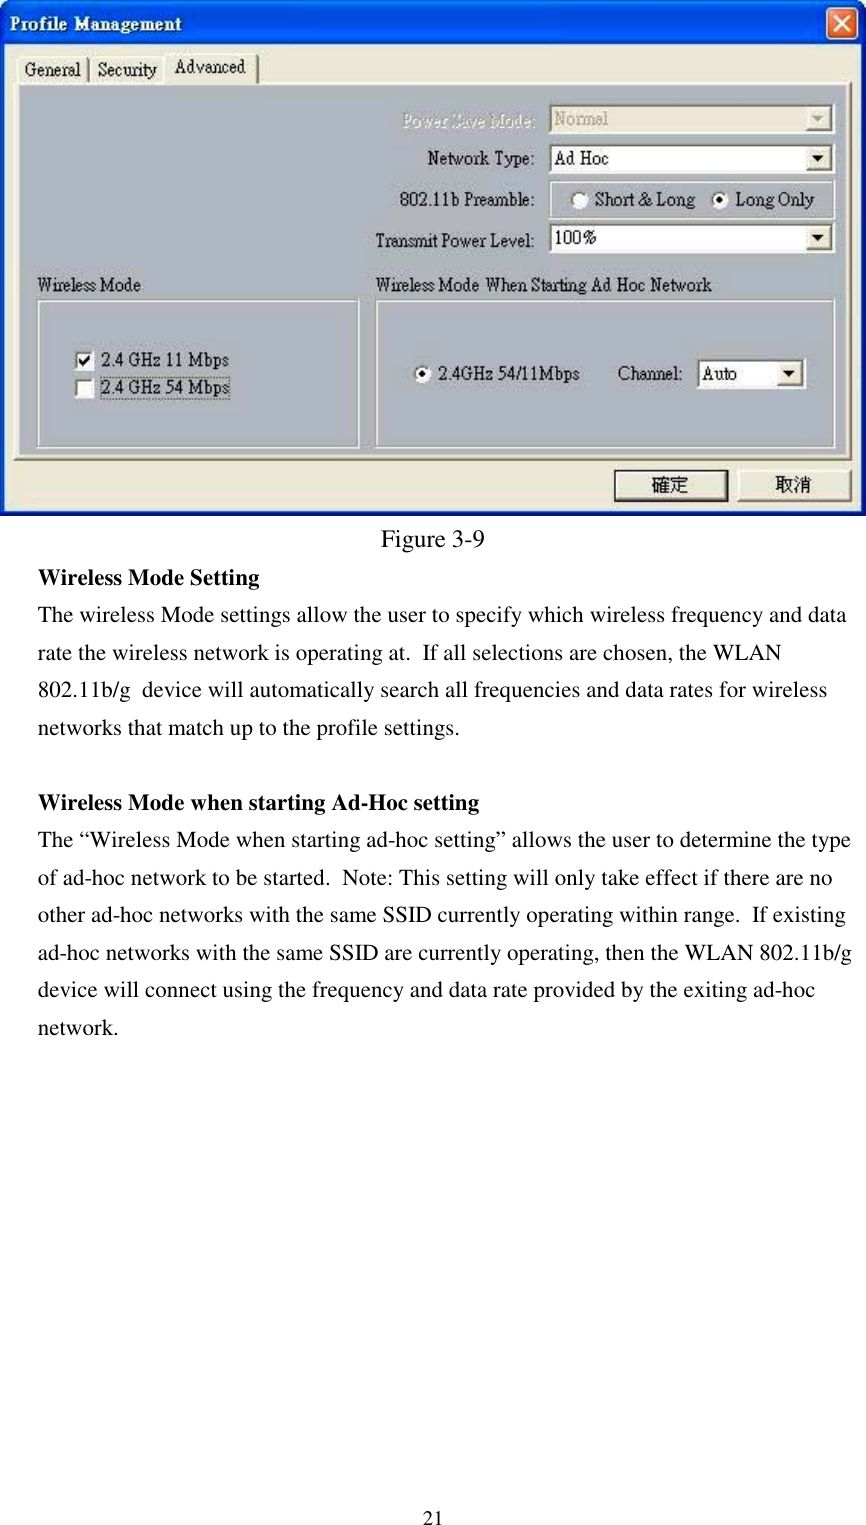 21Figure 3-9Wireless Mode SettingThe wireless Mode settings allow the user to specify which wireless frequency and datarate the wireless network is operating at.  If all selections are chosen, the WLAN802.11b/g  device will automatically search all frequencies and data rates for wirelessnetworks that match up to the profile settings.Wireless Mode when starting Ad-Hoc settingThe “Wireless Mode when starting ad-hoc setting” allows the user to determine the typeof ad-hoc network to be started.  Note: This setting will only take effect if there are noother ad-hoc networks with the same SSID currently operating within range.  If existingad-hoc networks with the same SSID are currently operating, then the WLAN 802.11b/gdevice will connect using the frequency and data rate provided by the exiting ad-hocnetwork.